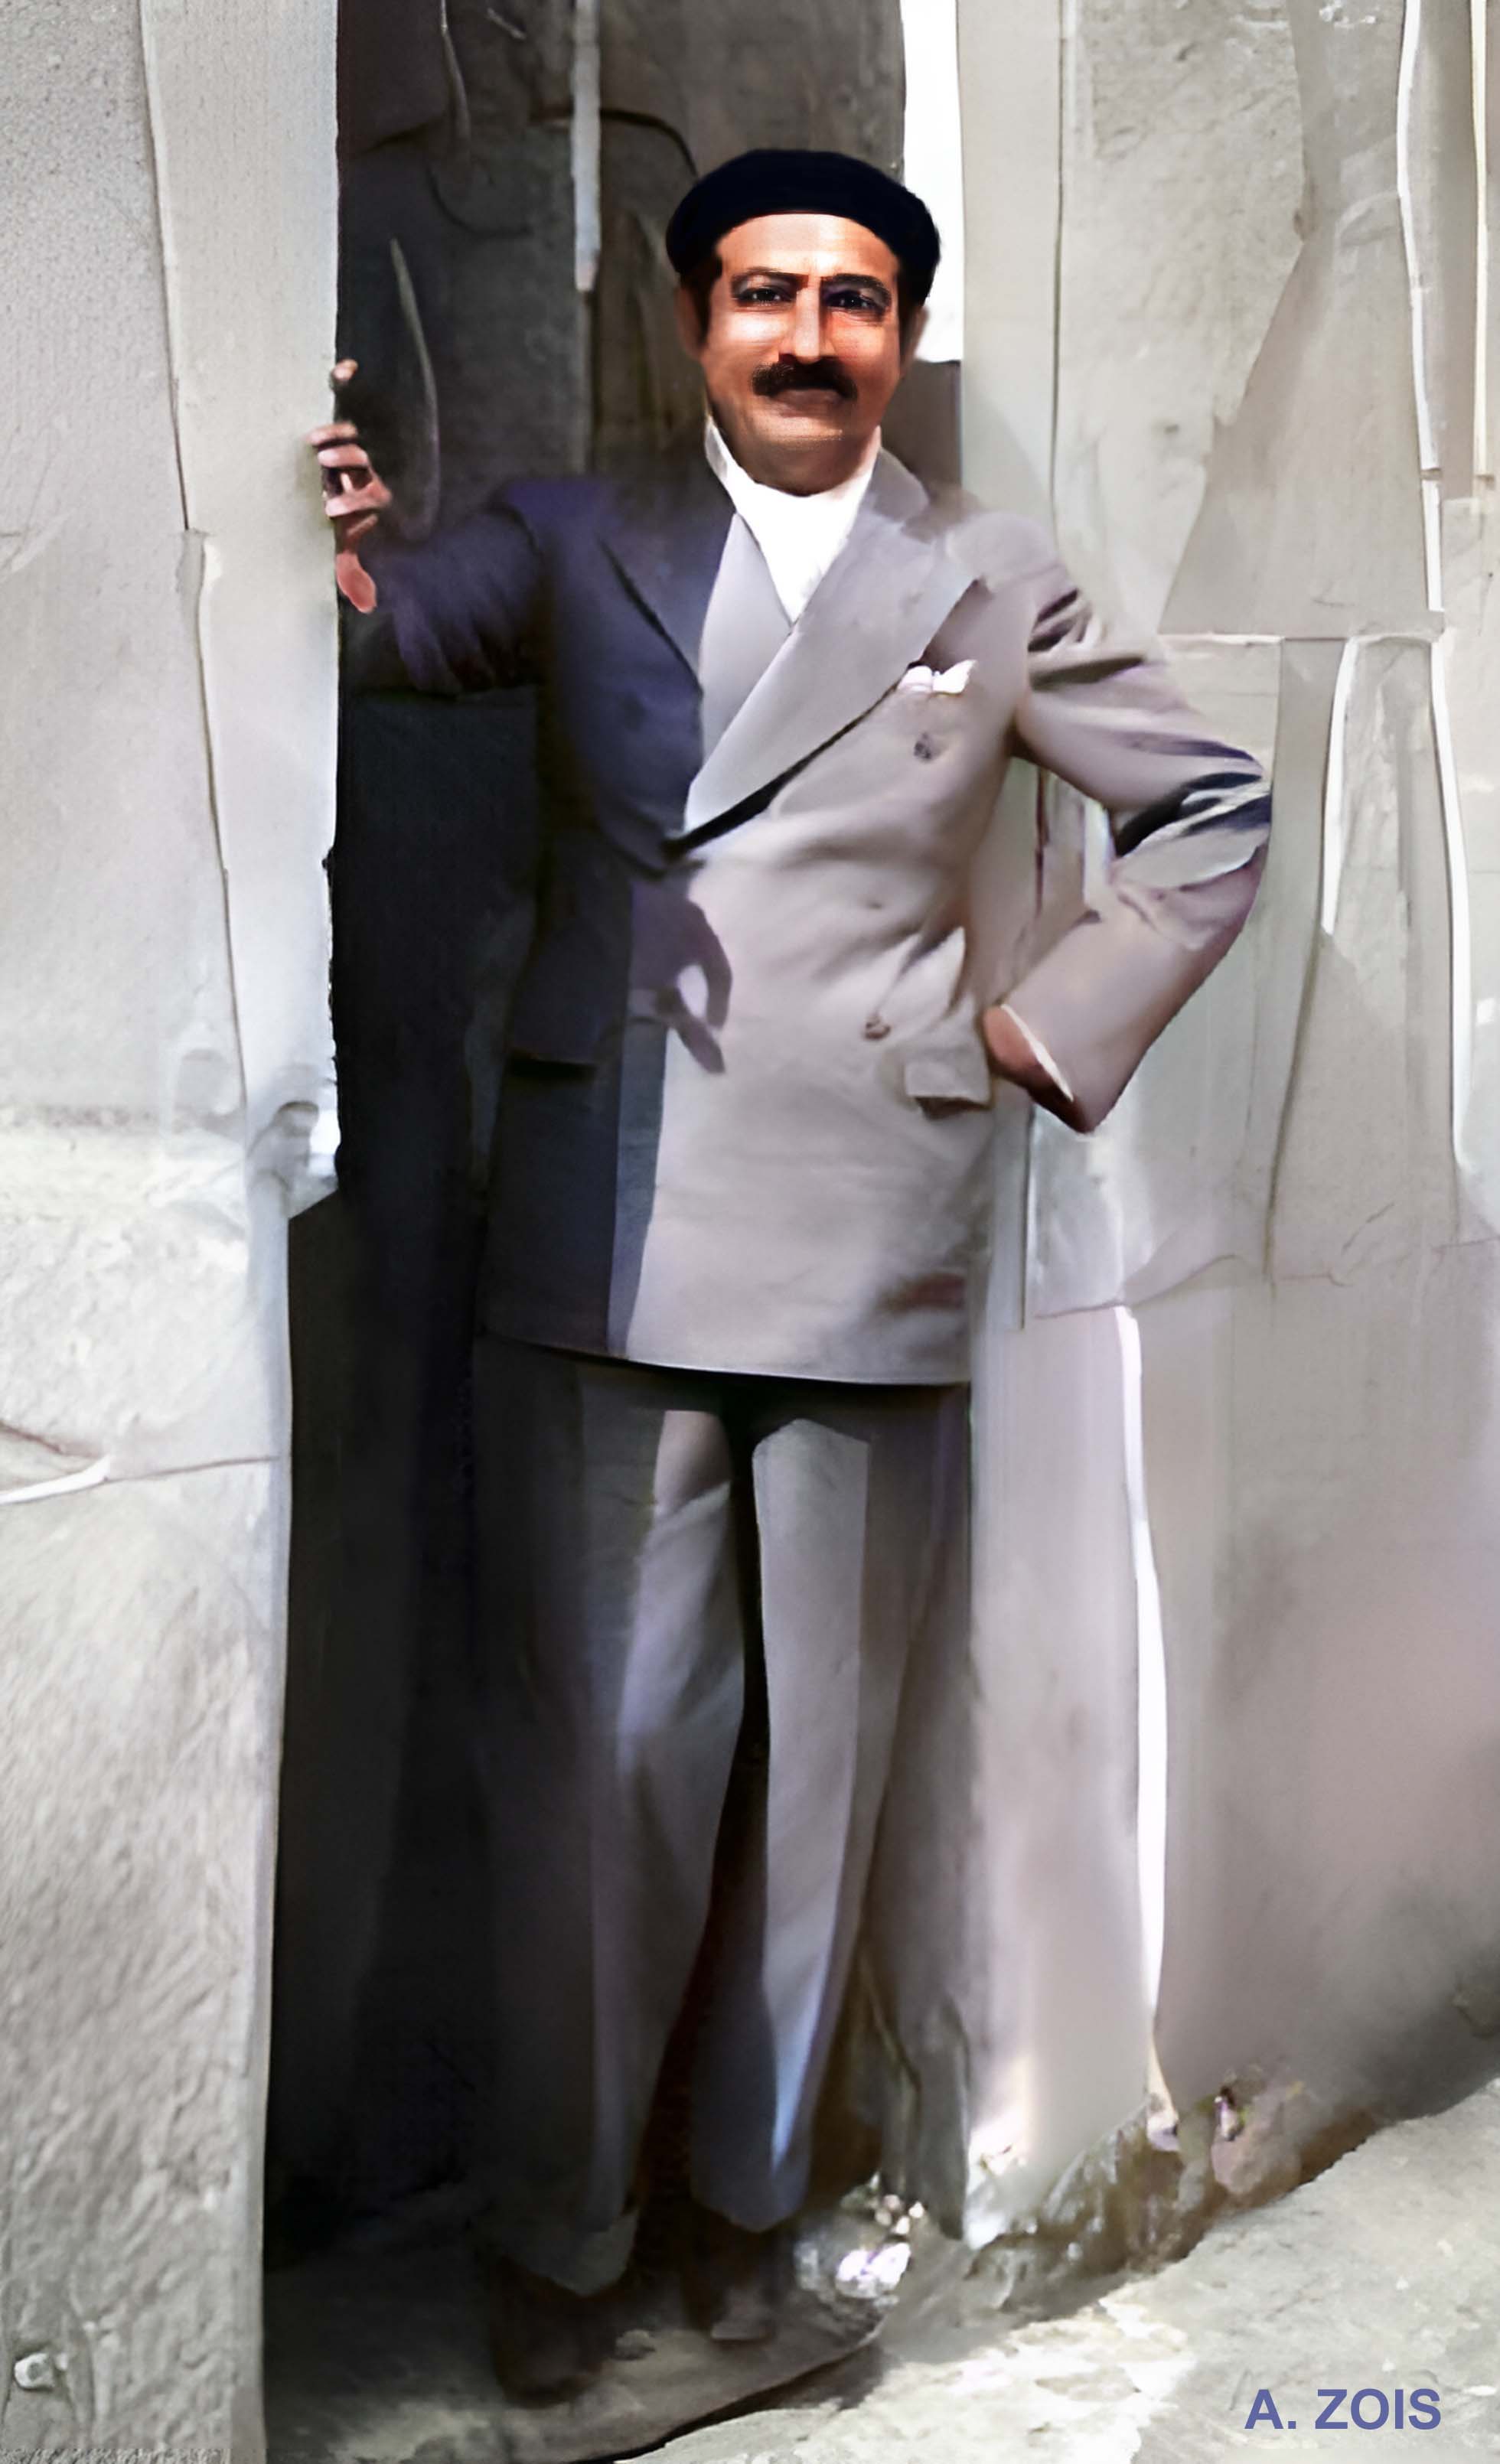 This is how Meher Baba would have looked like during his visit to Madrid. The photo was taken at Sakkara, Egypt in Dec 1932. Image trimmed & colourized by Anthony Zois.